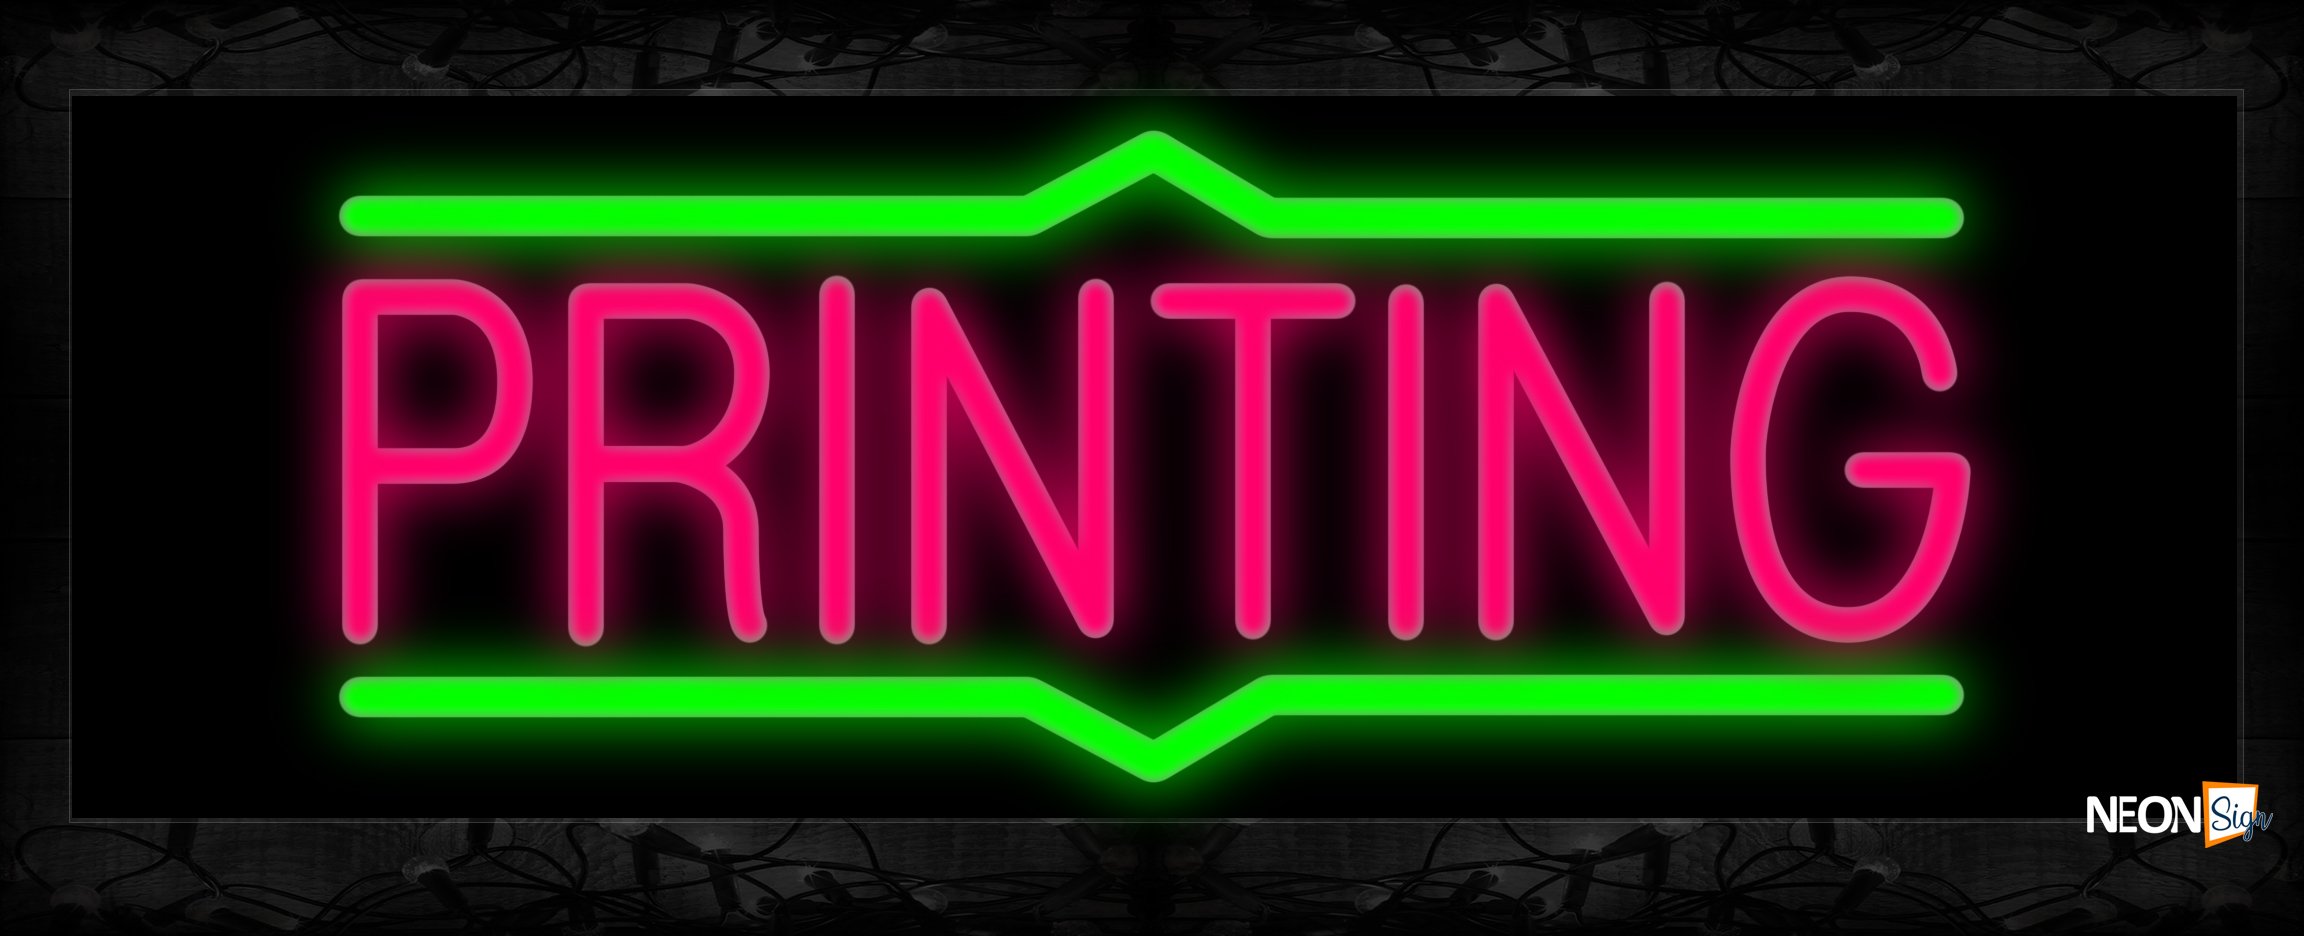 Image of 10114 Printing with border line Neon Signs 13x32 Black Backing